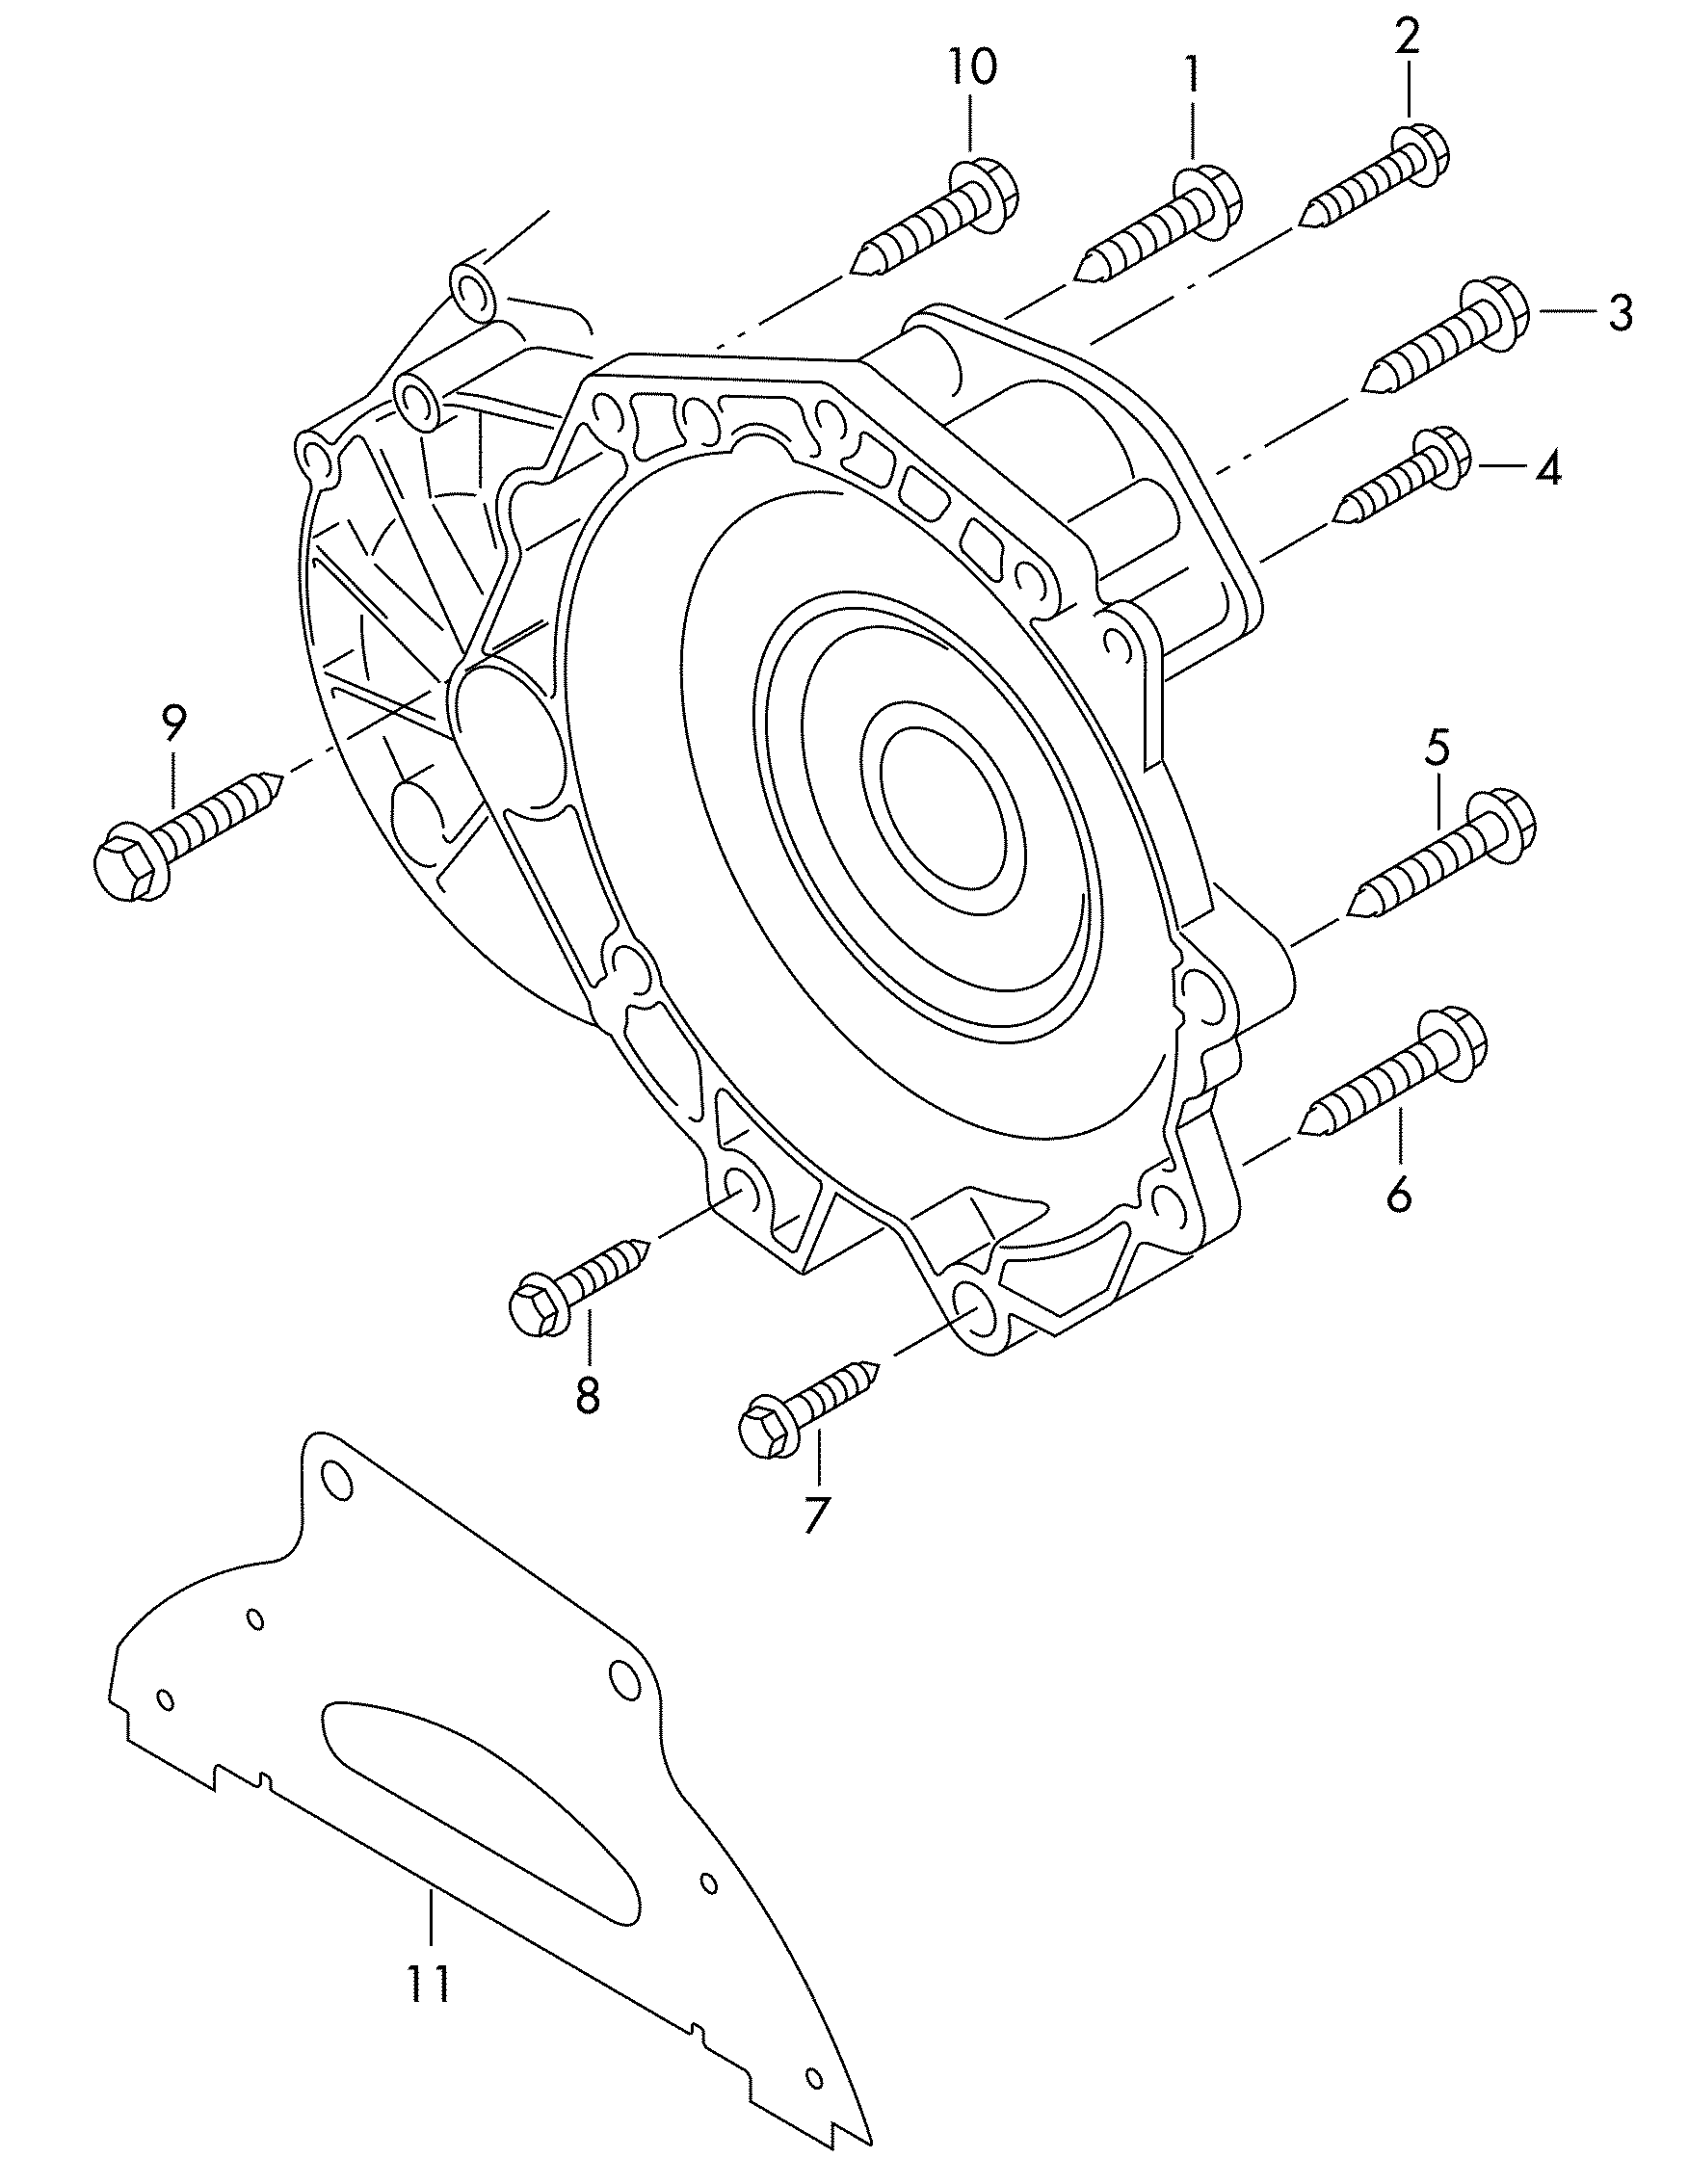 mounting parts for engine and<br>transmissionFor 7-speed dual clutch<br>gearbox DQ200 - Yeti - yet